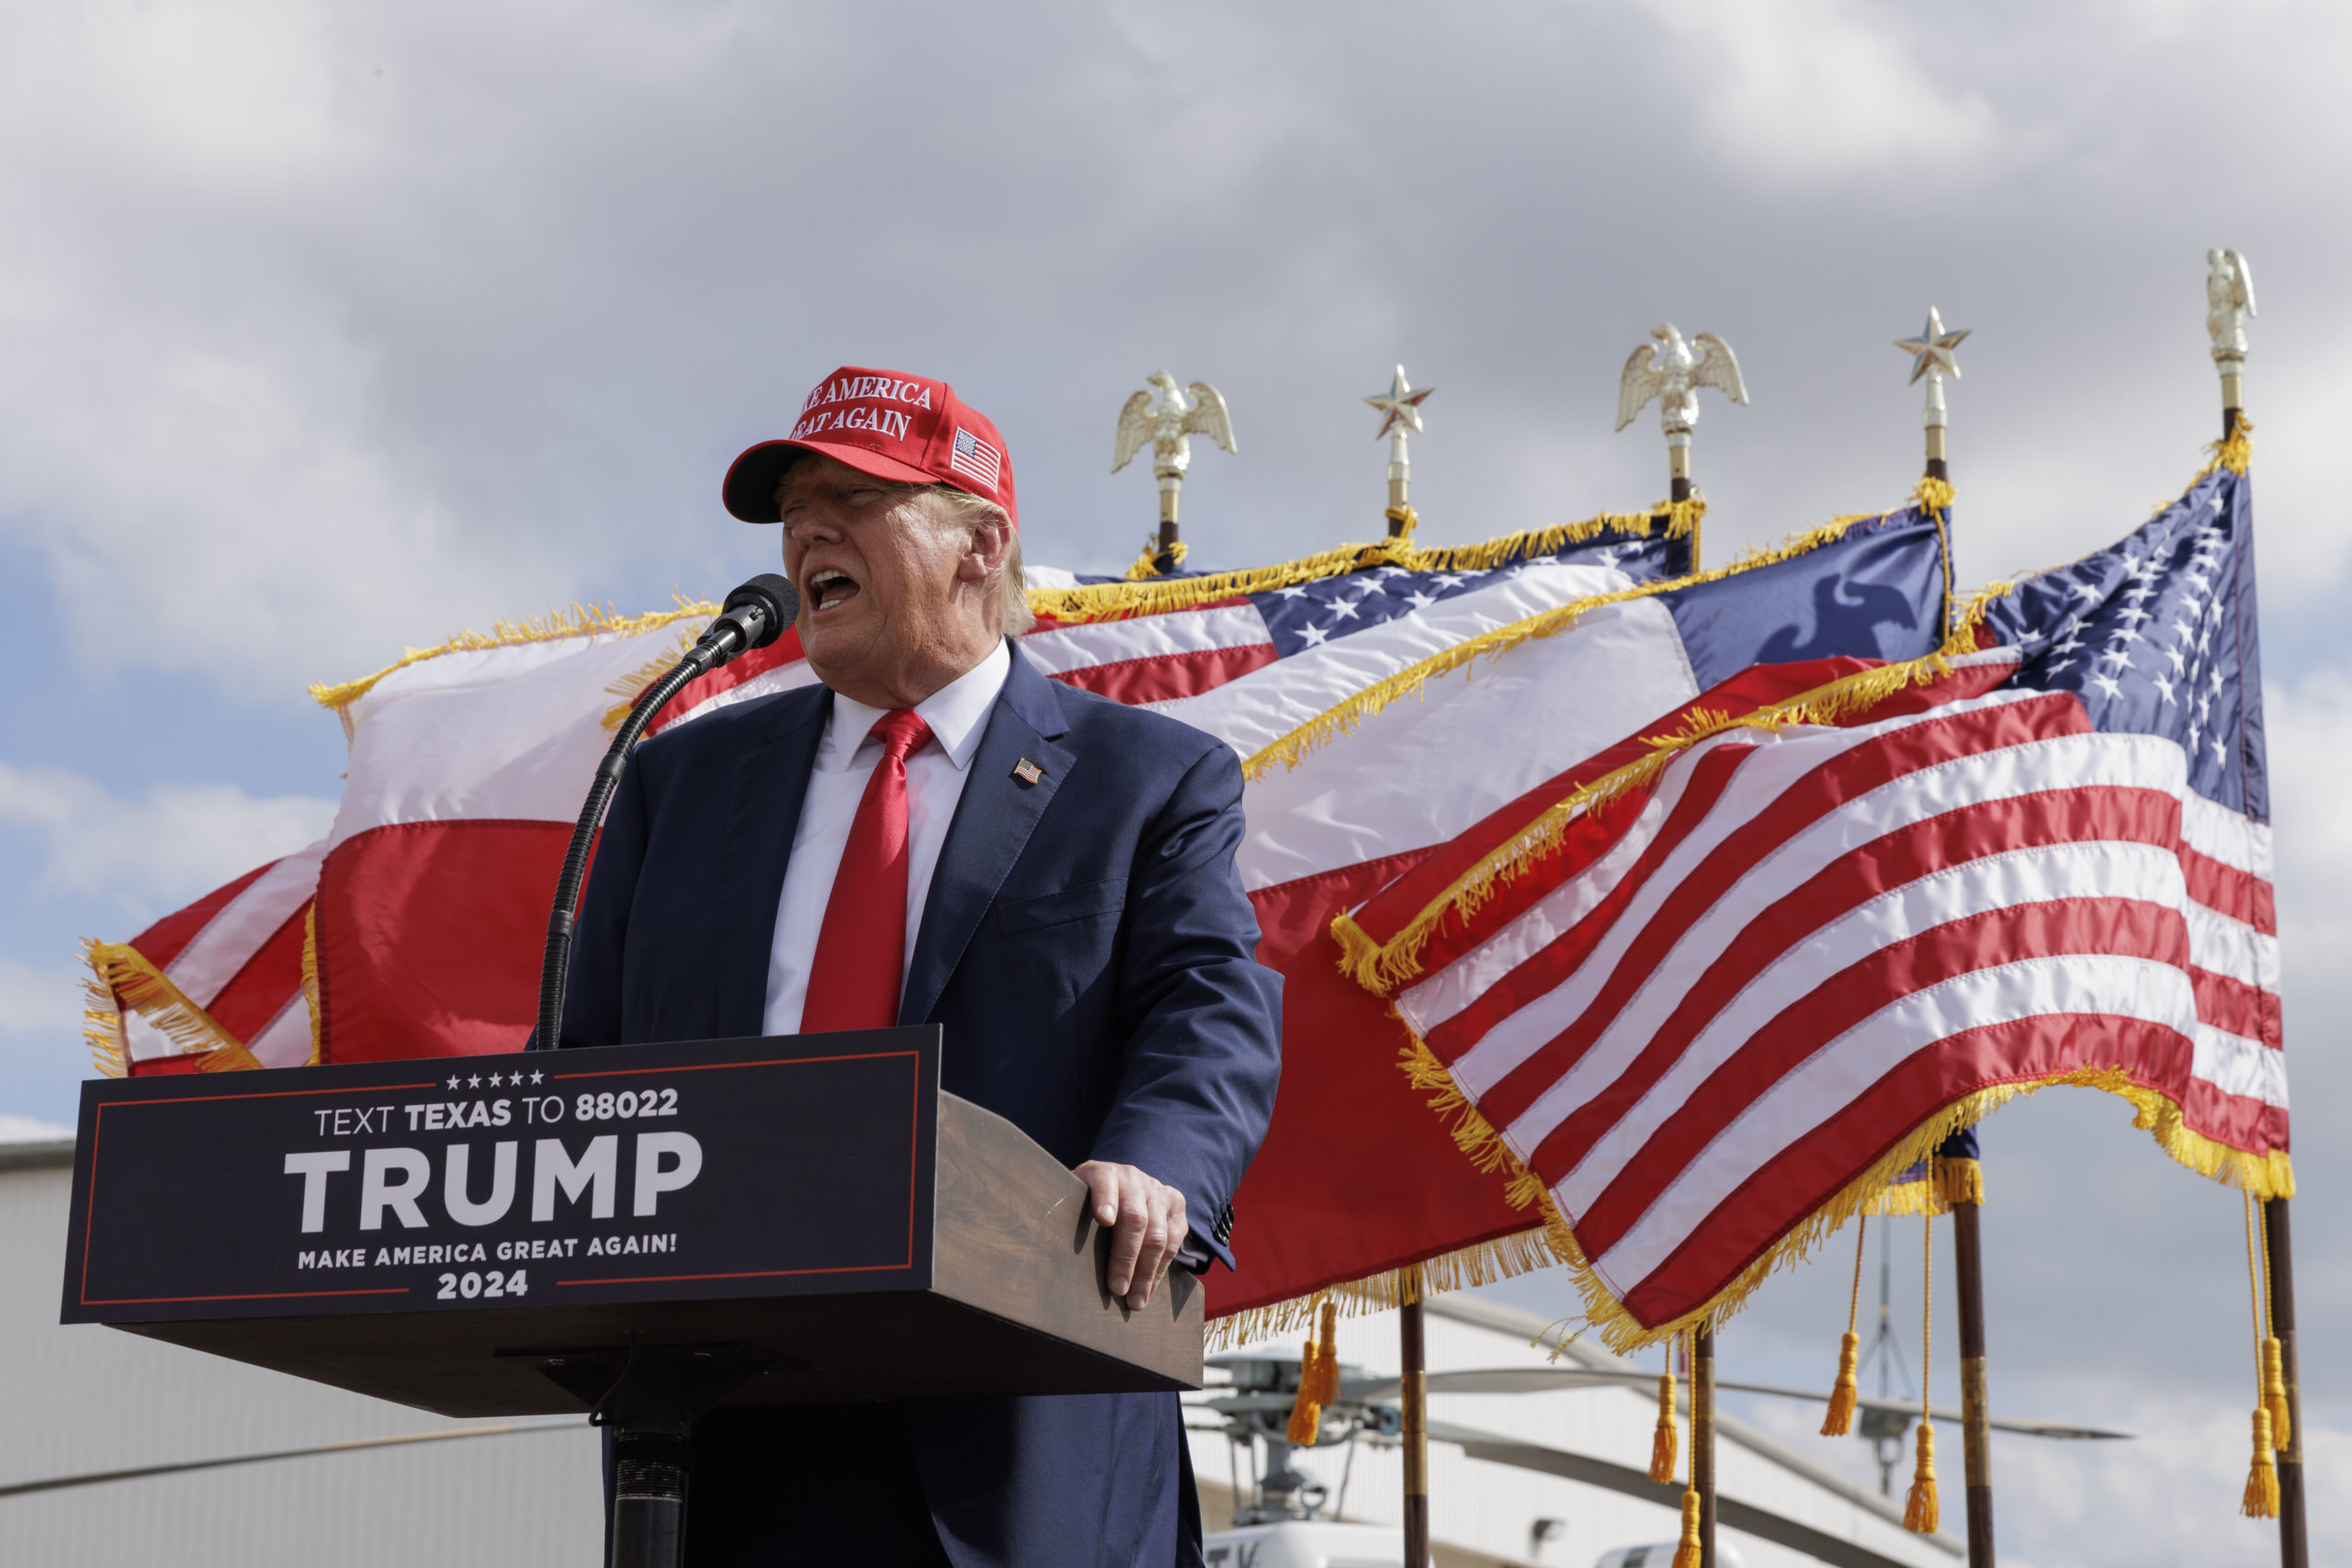 EDINBURG, TEXAS - NOVEMBER 19: Former President Donald Trump gives remarks at the South Texas International airport on November 19, 2023 in Edinburg, Texas. Trump took the stage shortly after Texas Governor Greg Abbott officially endorsed the former president for his 2024 presidential campaign. (Photo by Michael Gonzalez/Getty Images)